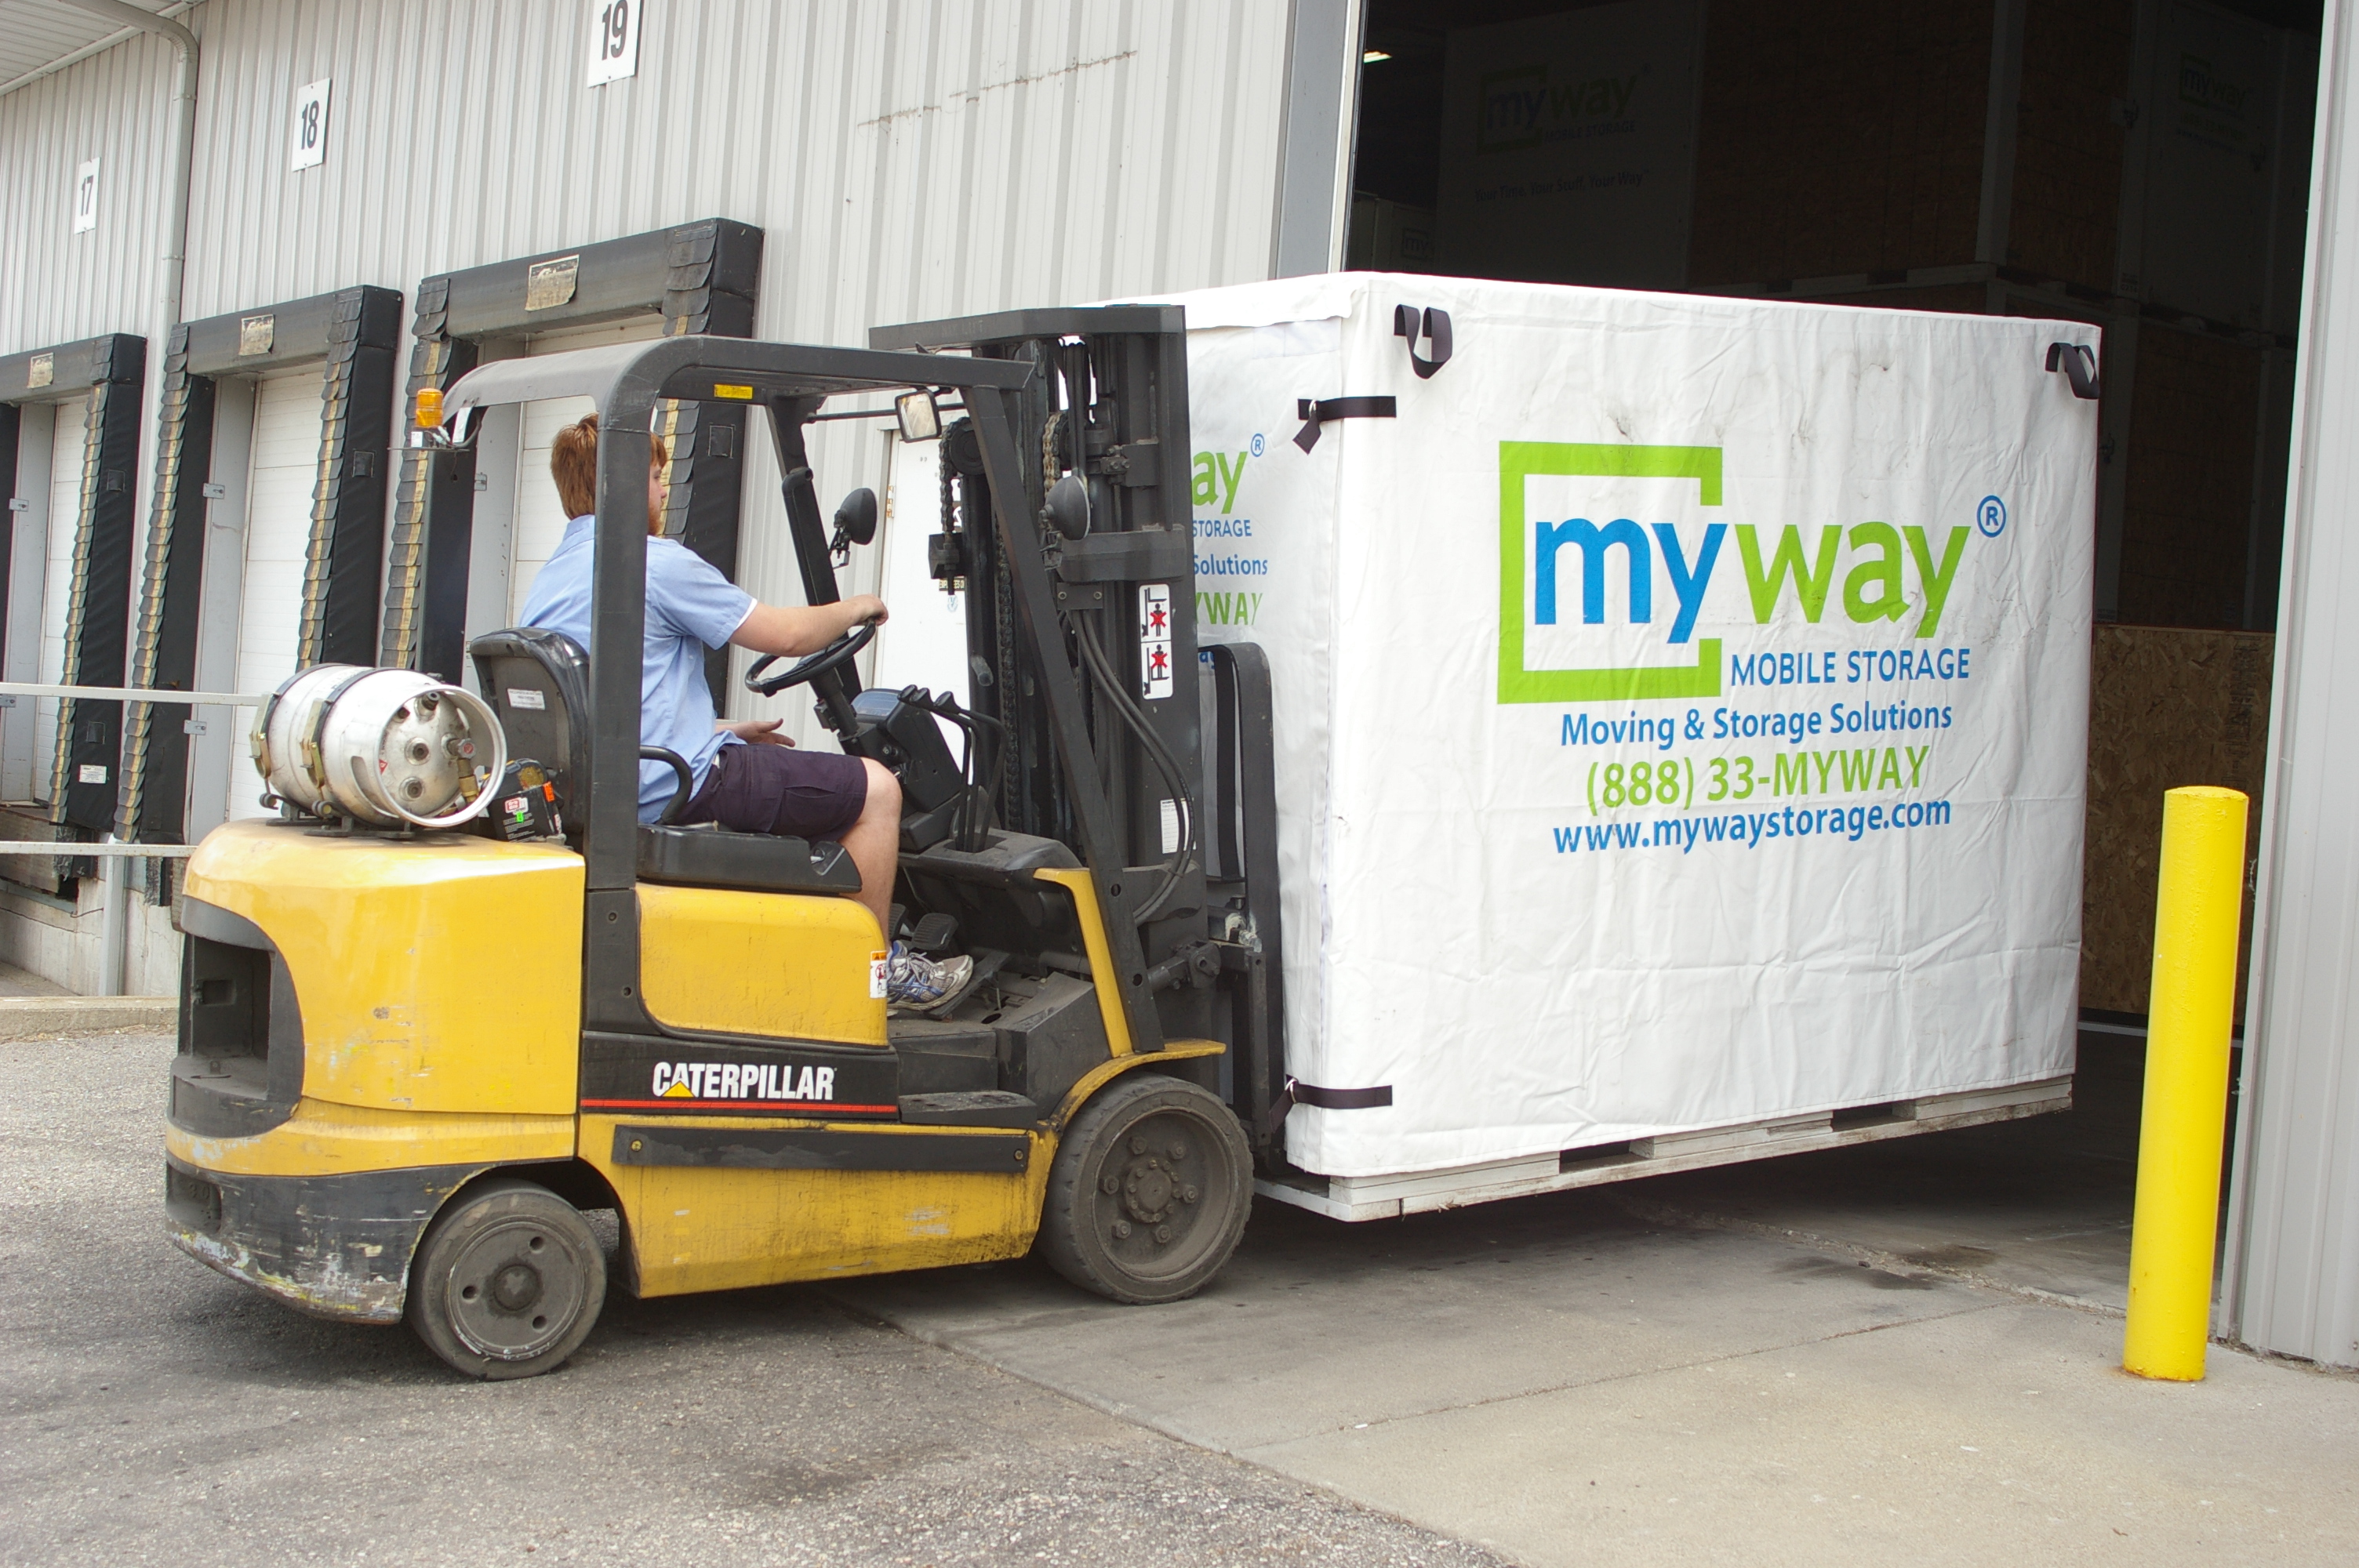 myway mobile storage facility